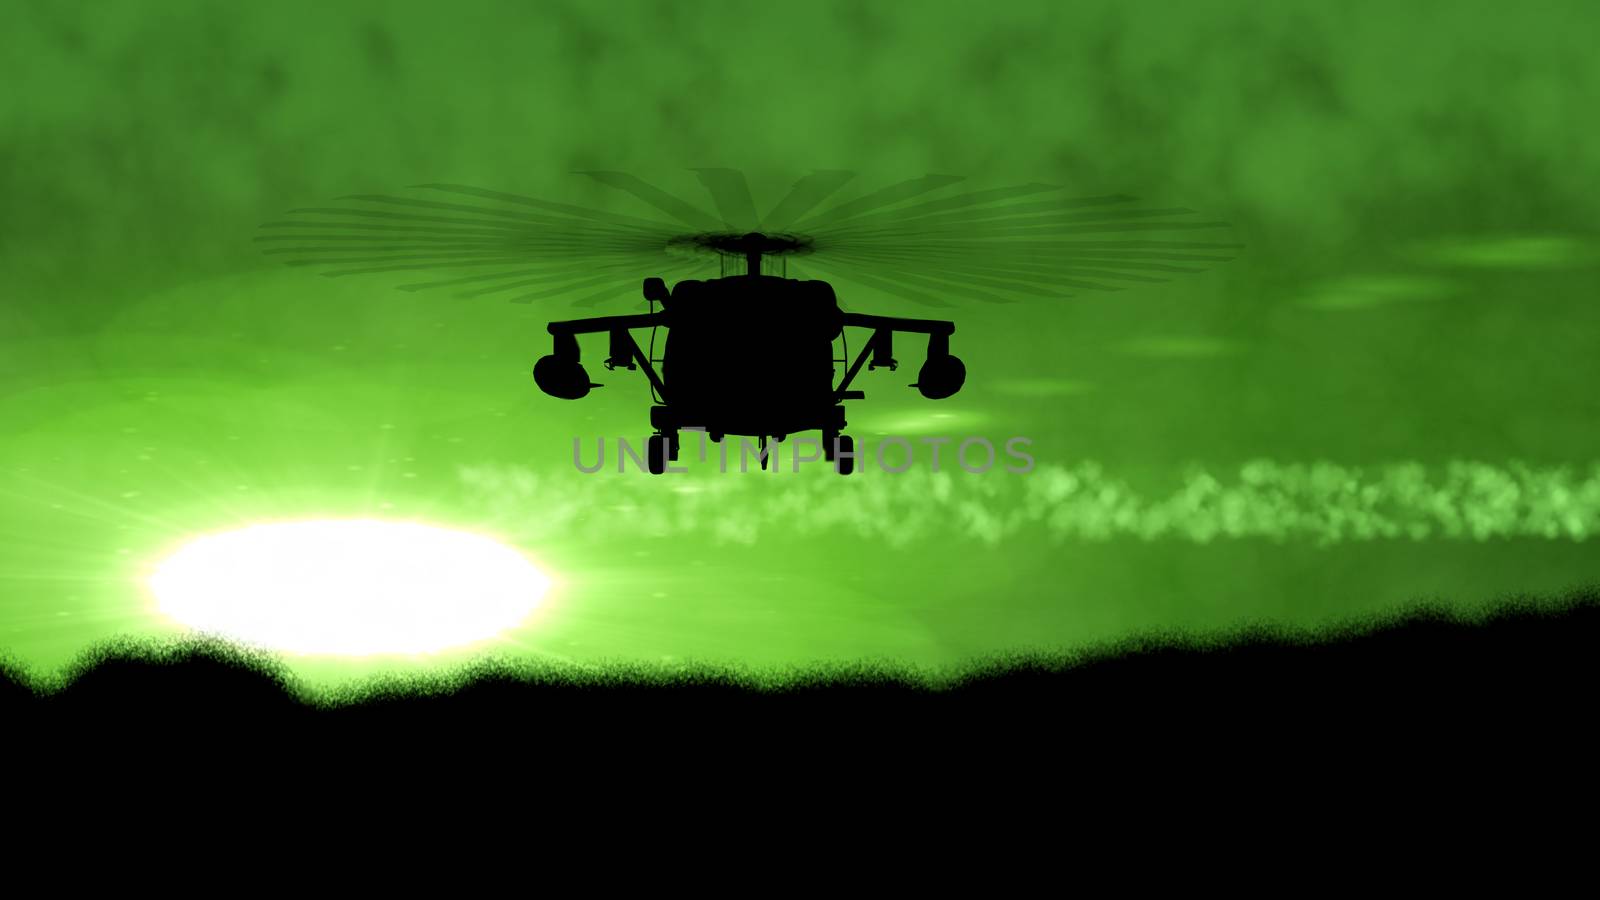 Apache helicopter silhouette at green sunset by klss